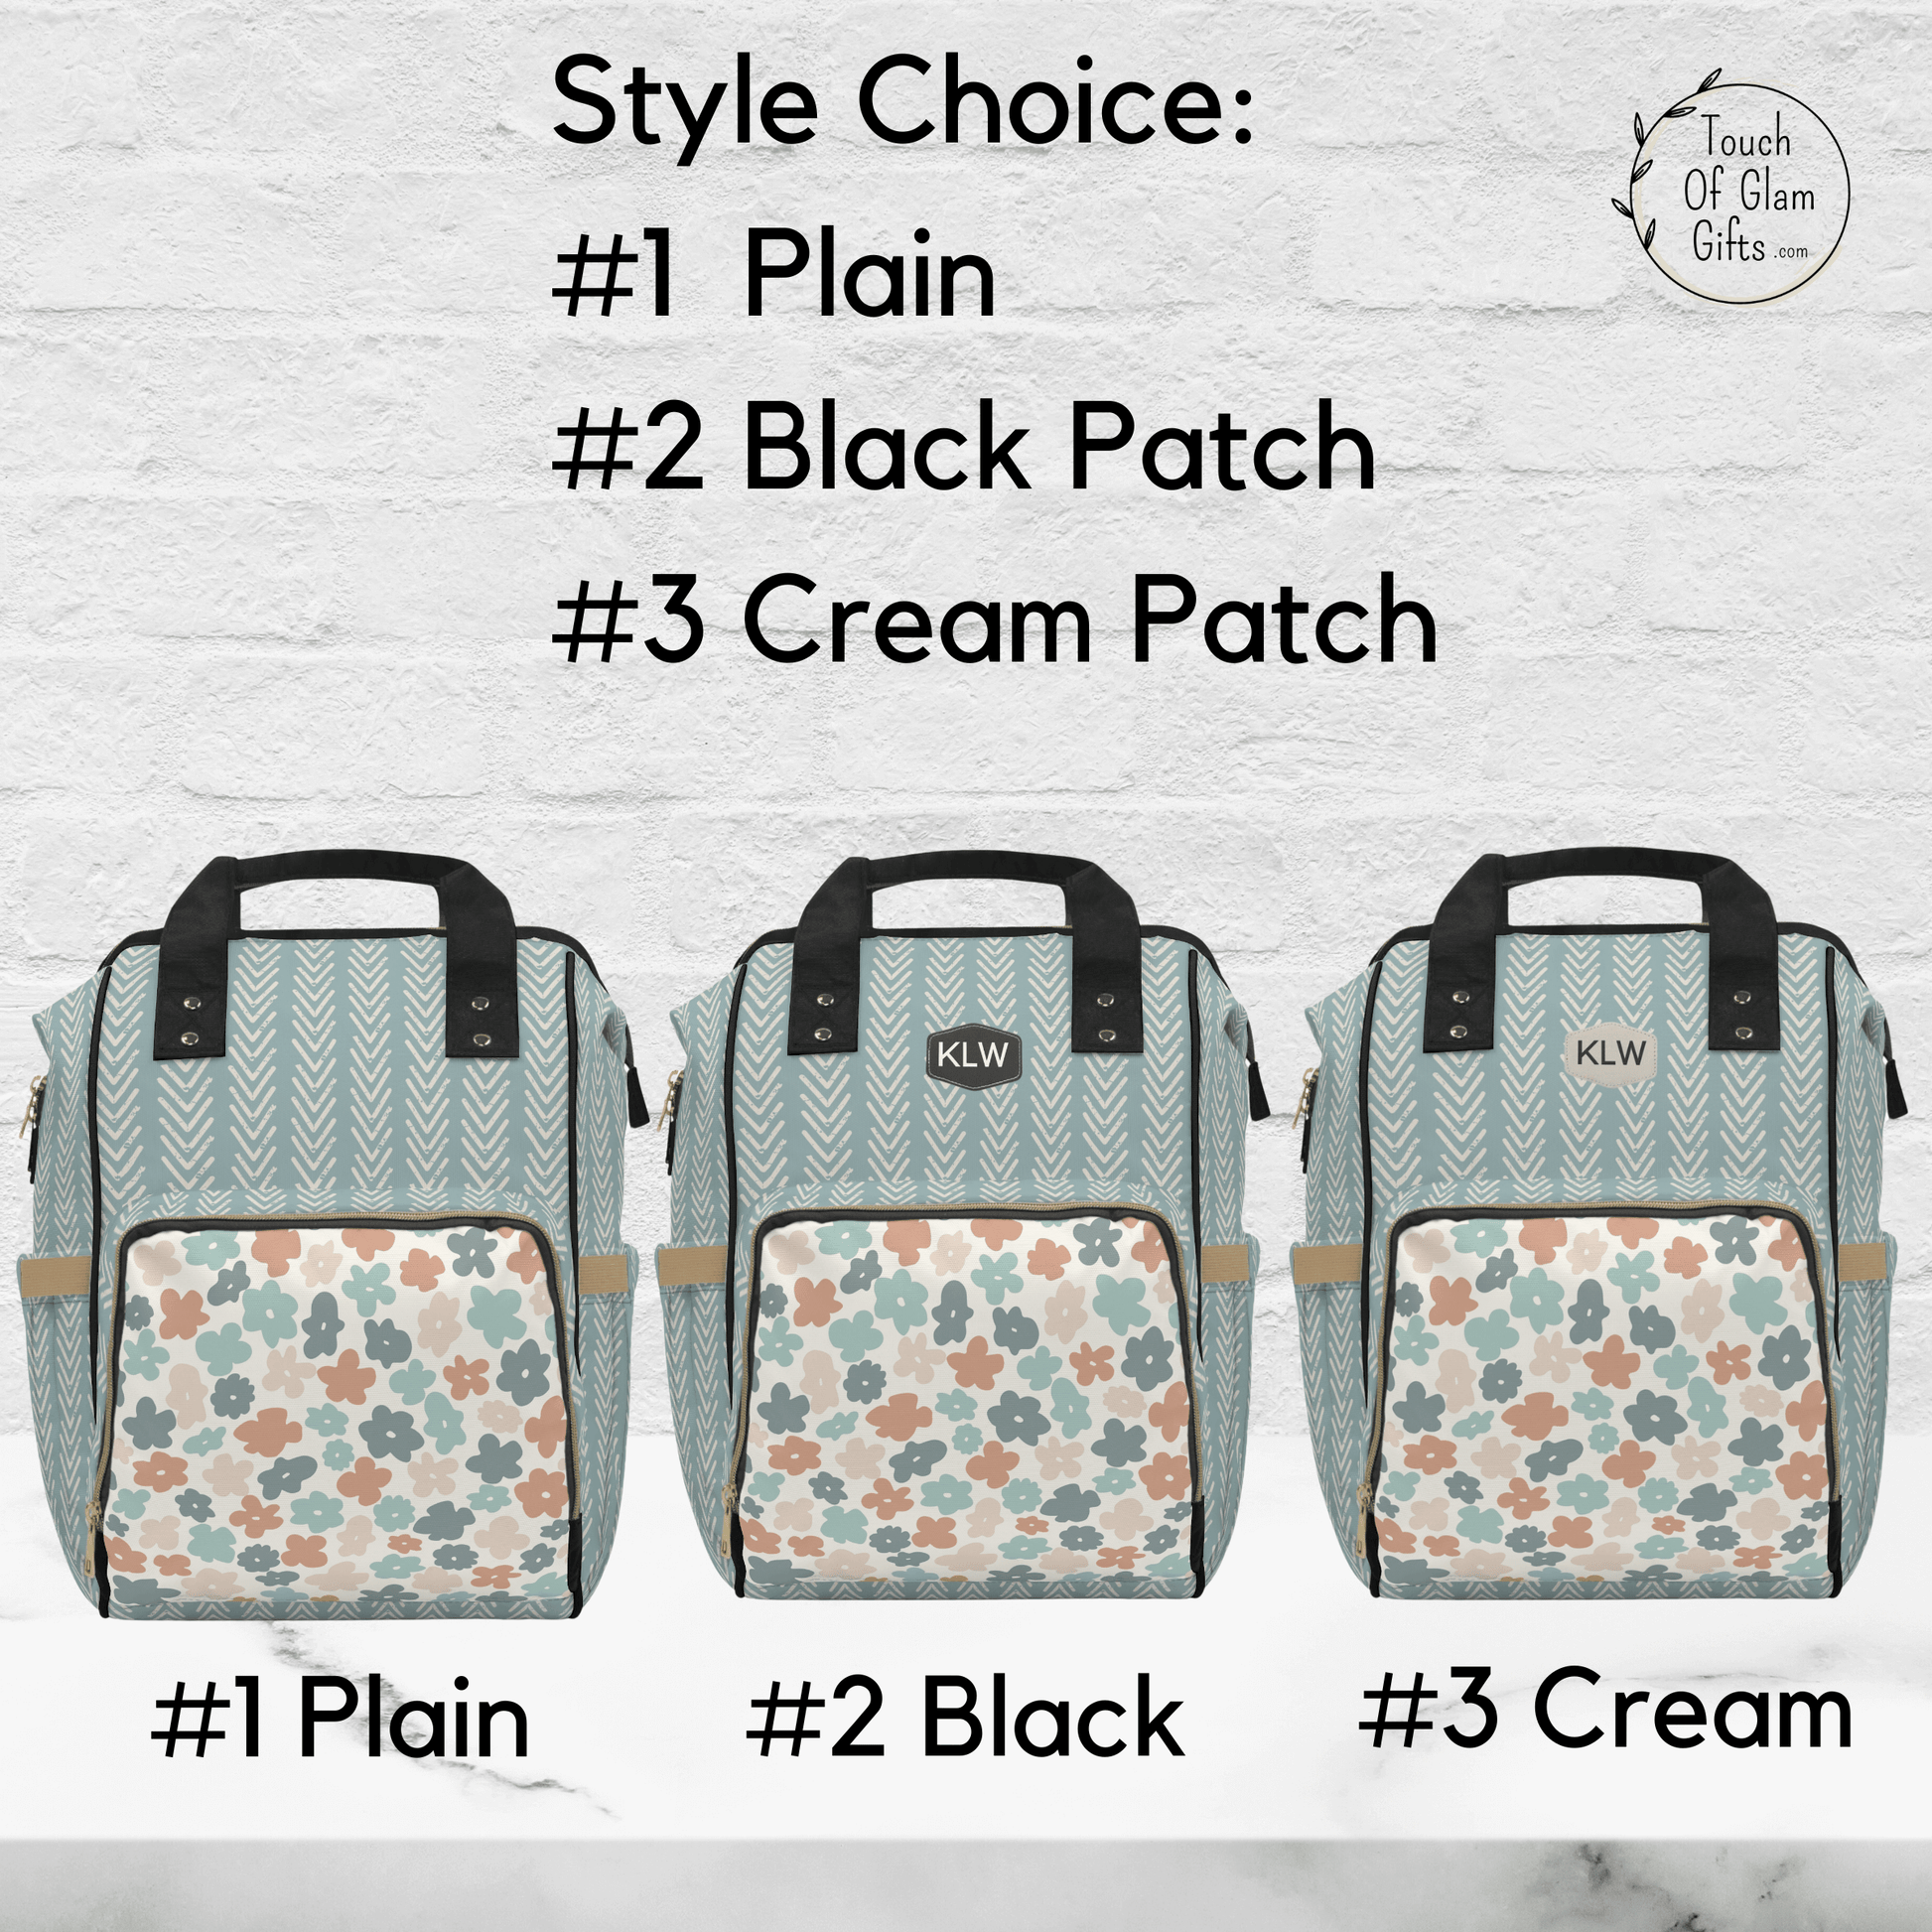 Style choice for personalizing your boho diaper bag are Plain, black patch with white Initials or cream patch with black initials. This custom bag is the perfect gift for new moms.